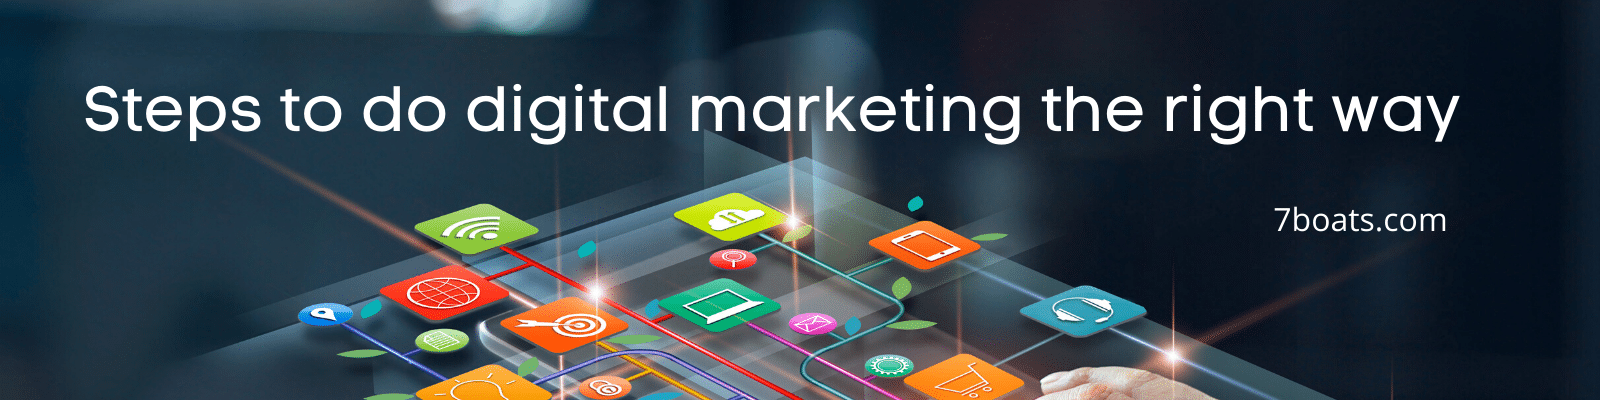 How to do digital marketing effectively? – Step-by-step guide to create a successful digital marketing strategy